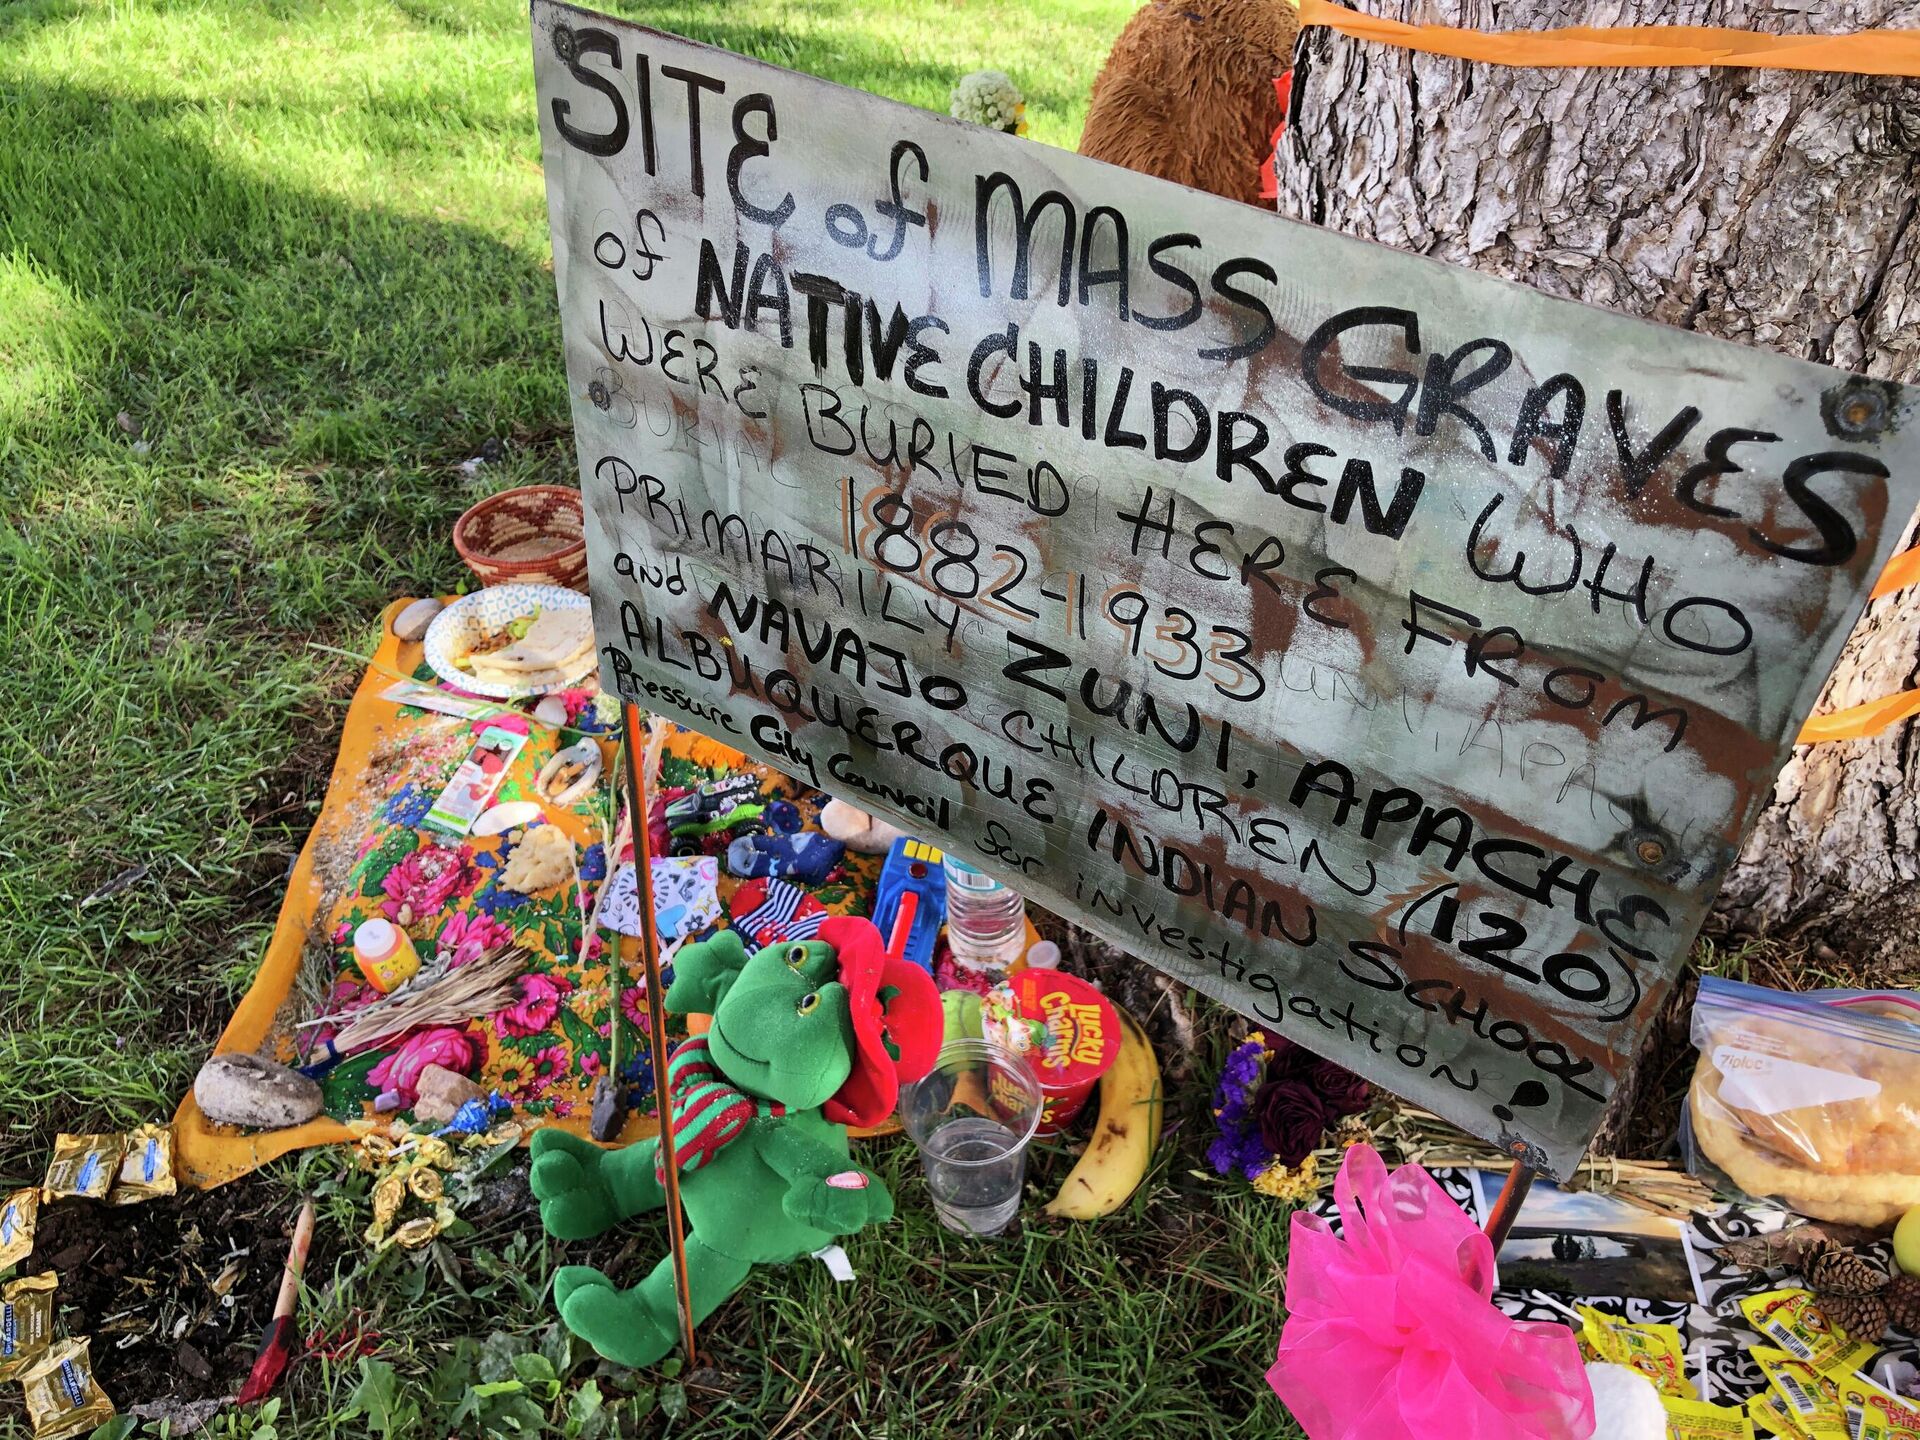 A makeshift memorial for the dozens of Indigenous children who died more than a century ago while attending a boarding school that was once located nearby is displayed under a tree at a public park in Albuquerque, N.M., on  July 1, 2021.  - Sputnik International, 1920, 08.08.2022